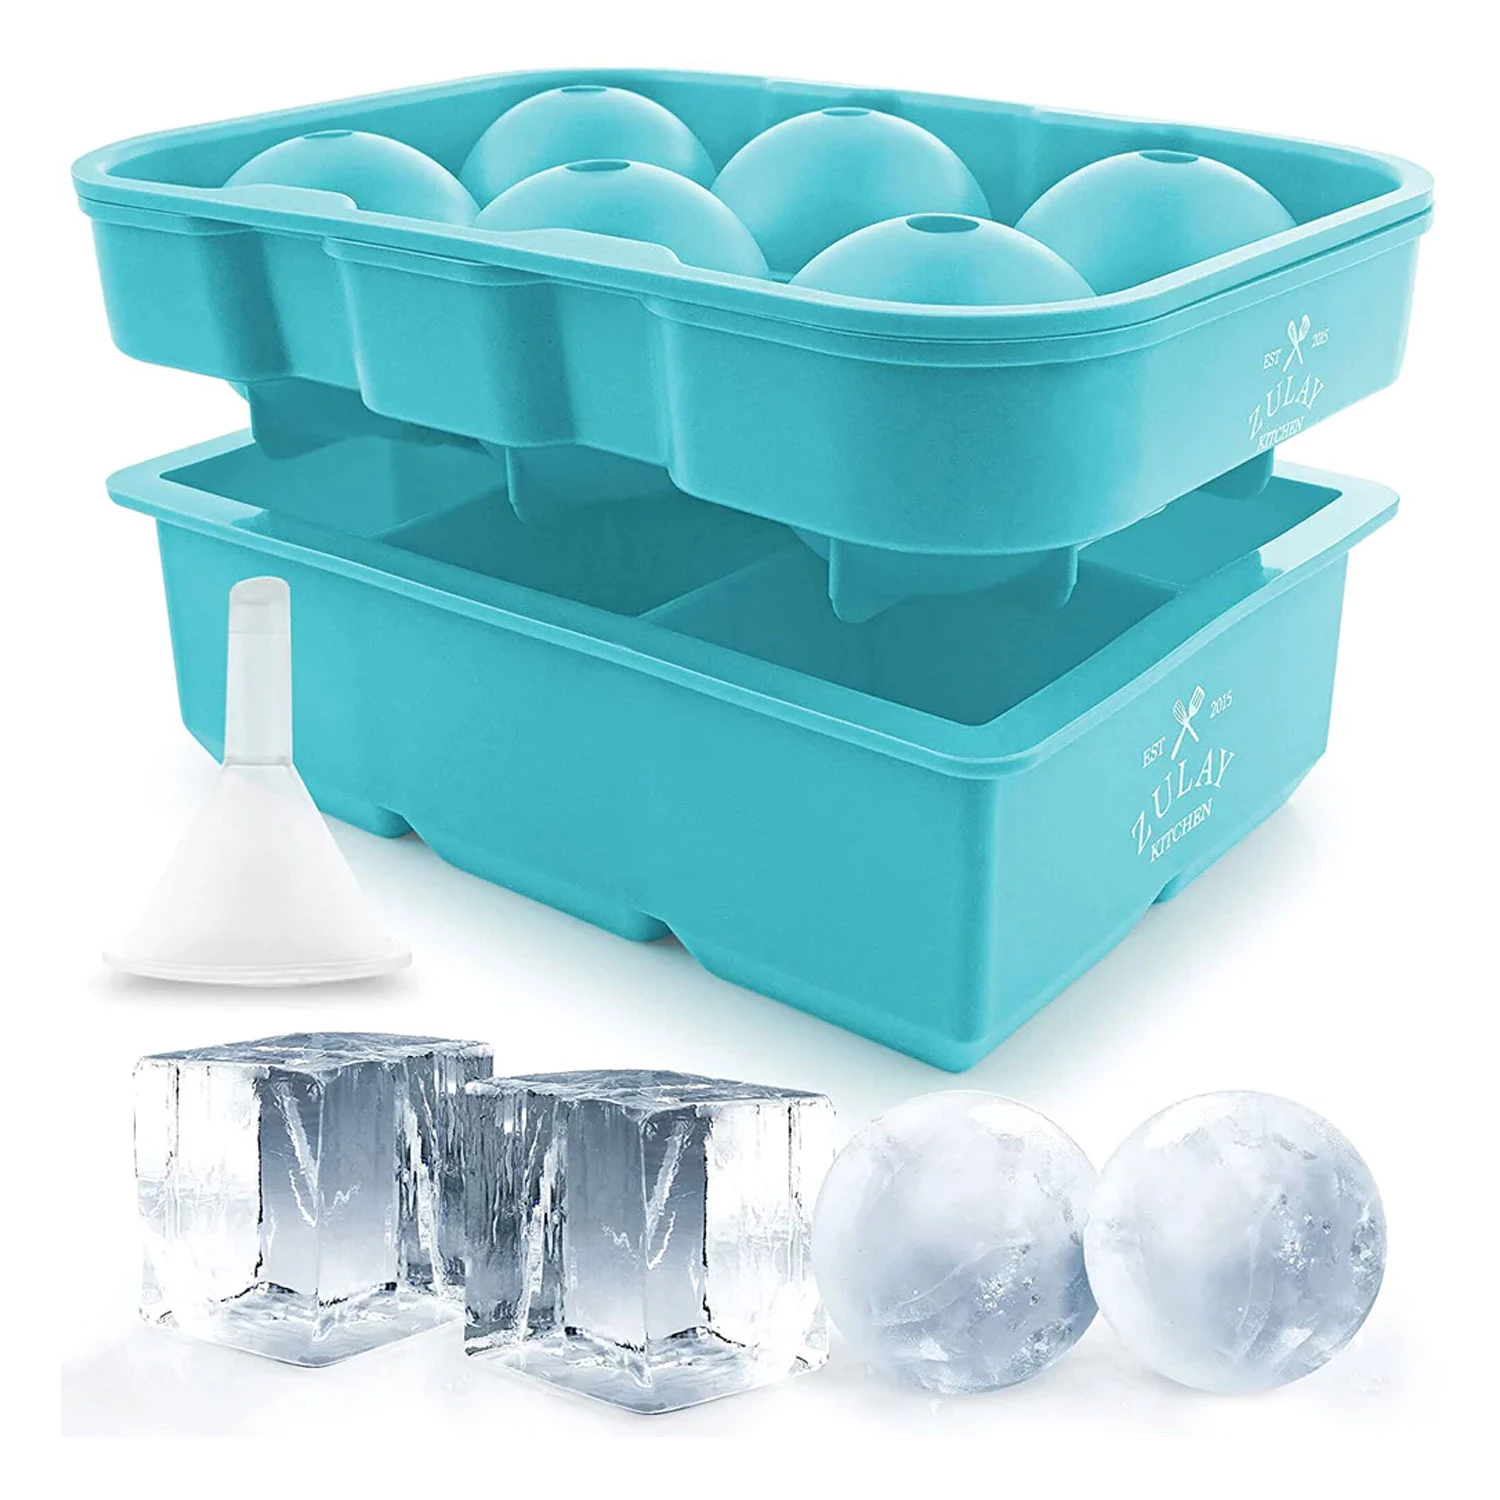 Silicone Square Ice Cube Mold and Ice Ball Mold (Set of 2)